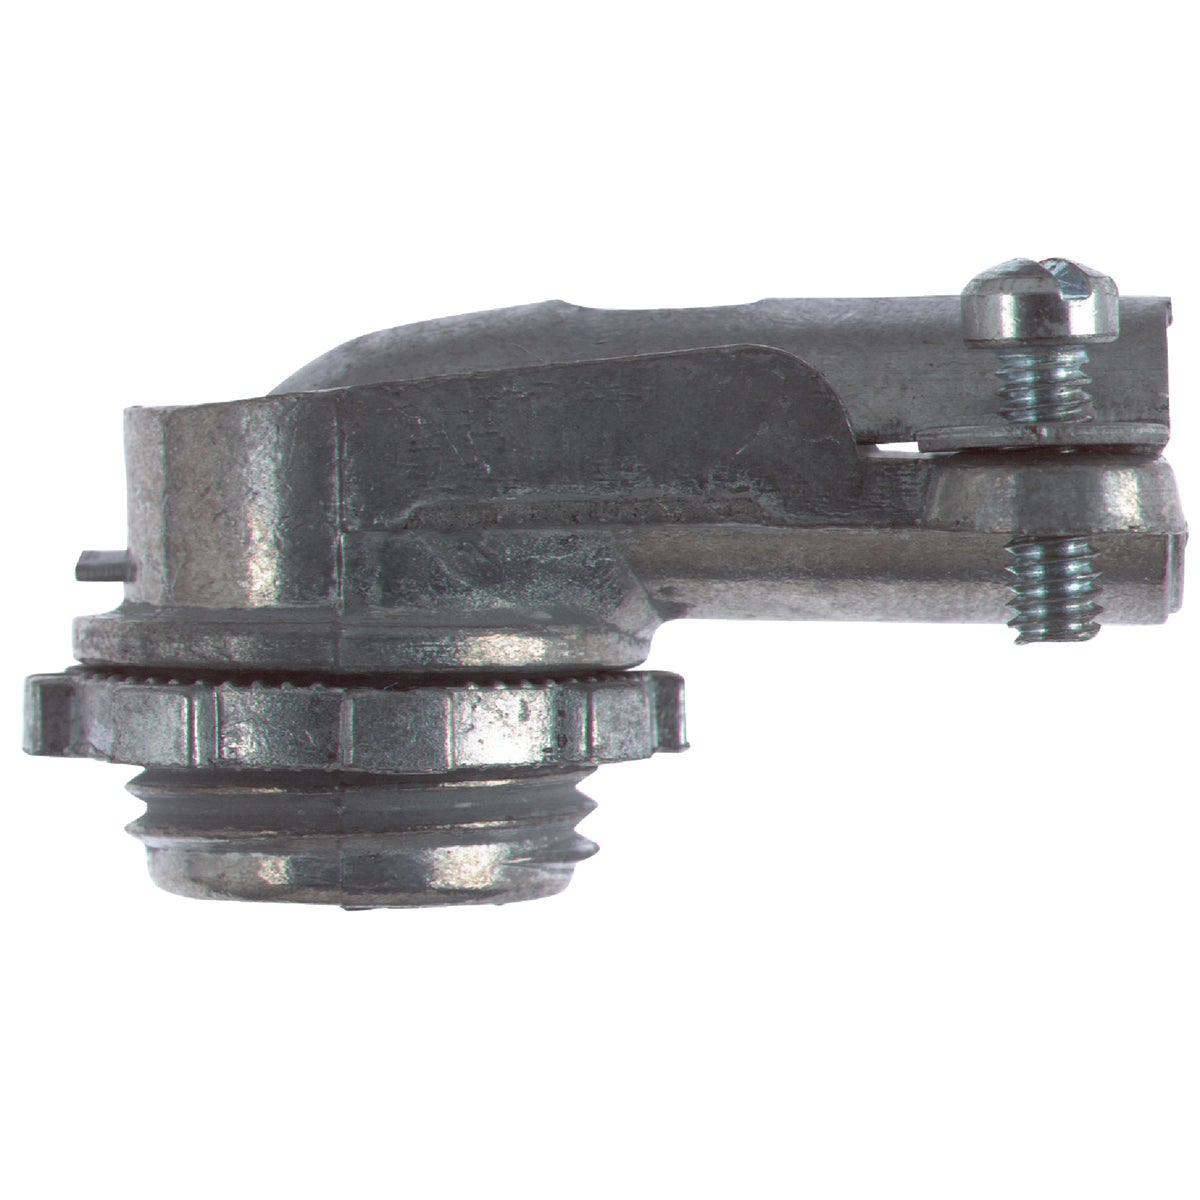 Item 509603, Clamp connector for armored cable, flexible steel, or flexible aluminum 